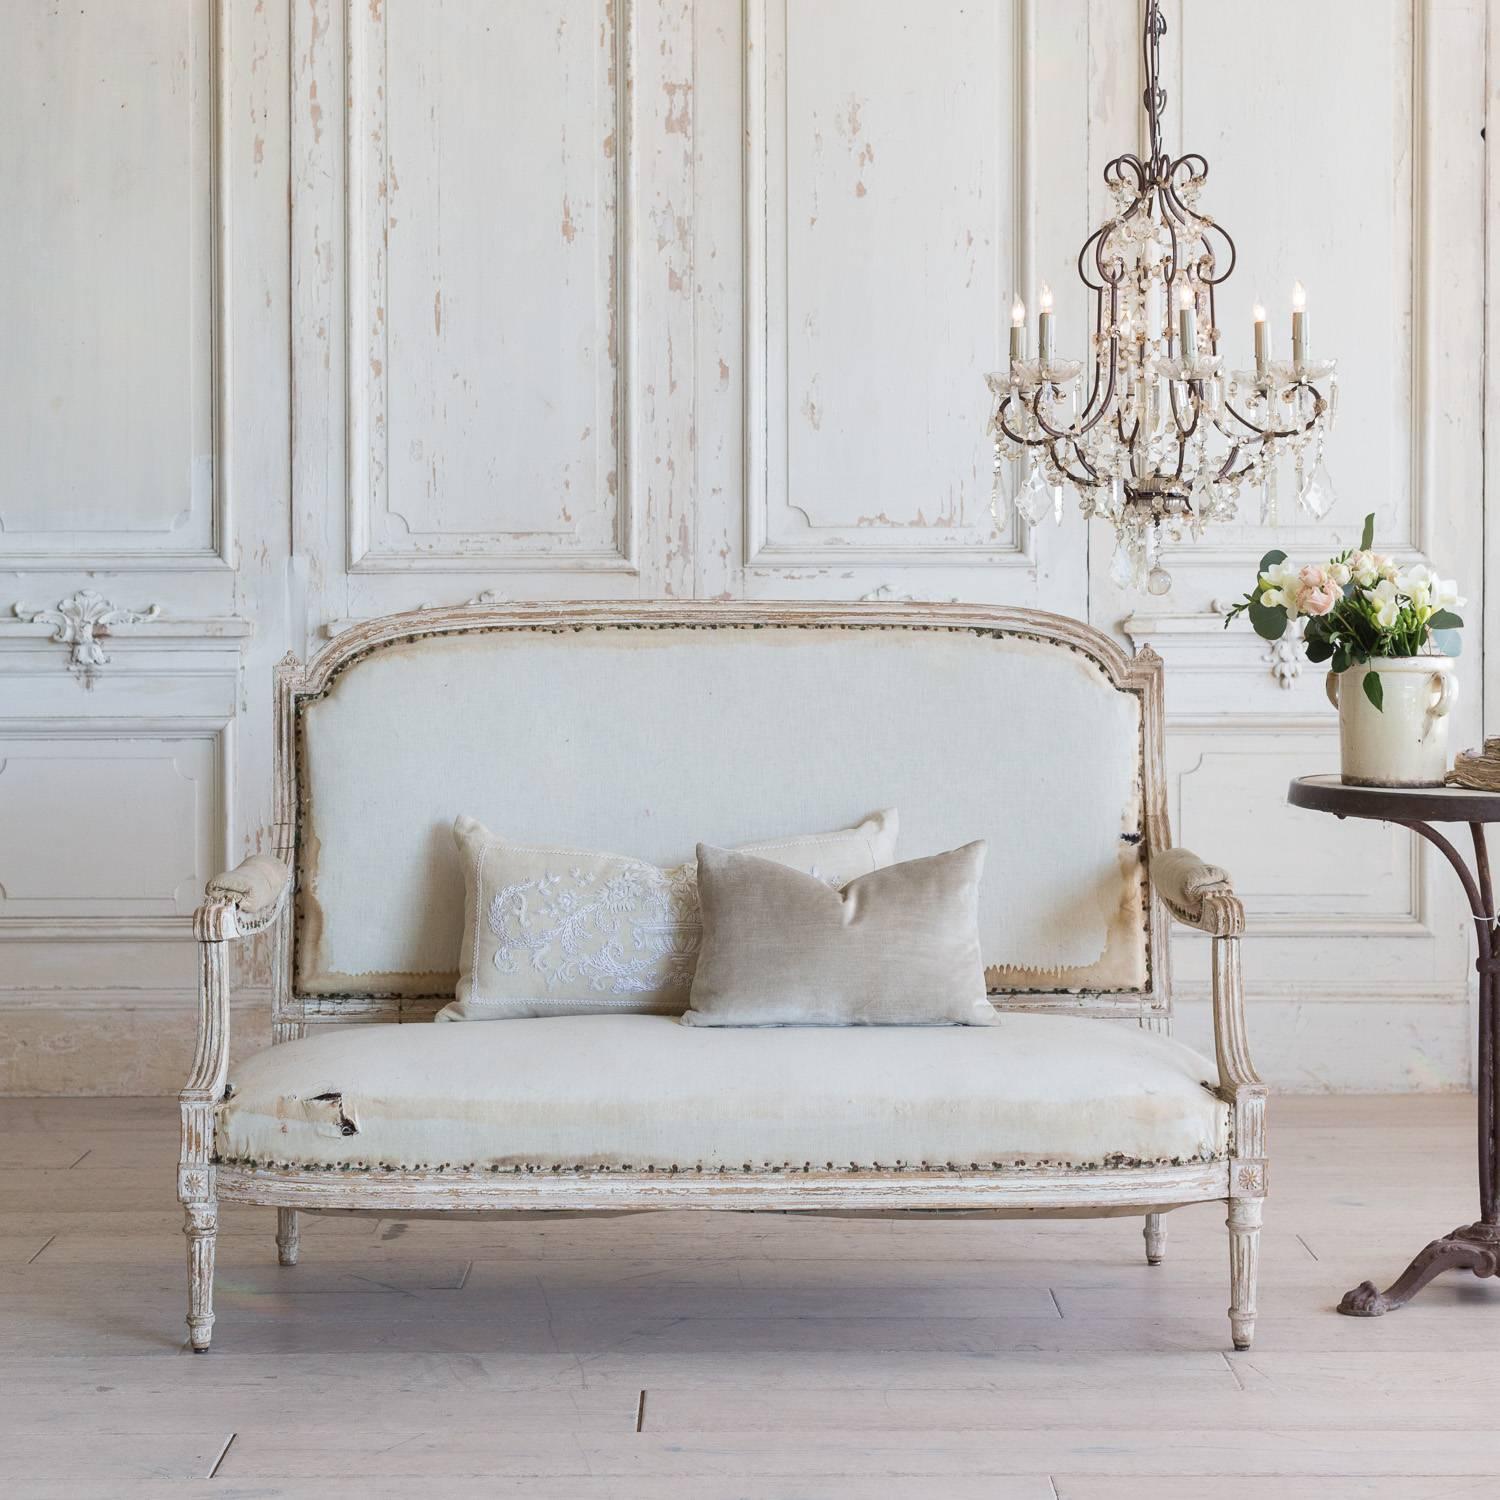 Adorable antique loveseat in distressed cream with lots of raw wood peaking through the finish. The Classic Louis XVI style boasts simple, grooves along the frame and small, architectural finials adorn the shoulders of this sofa. Shown in original